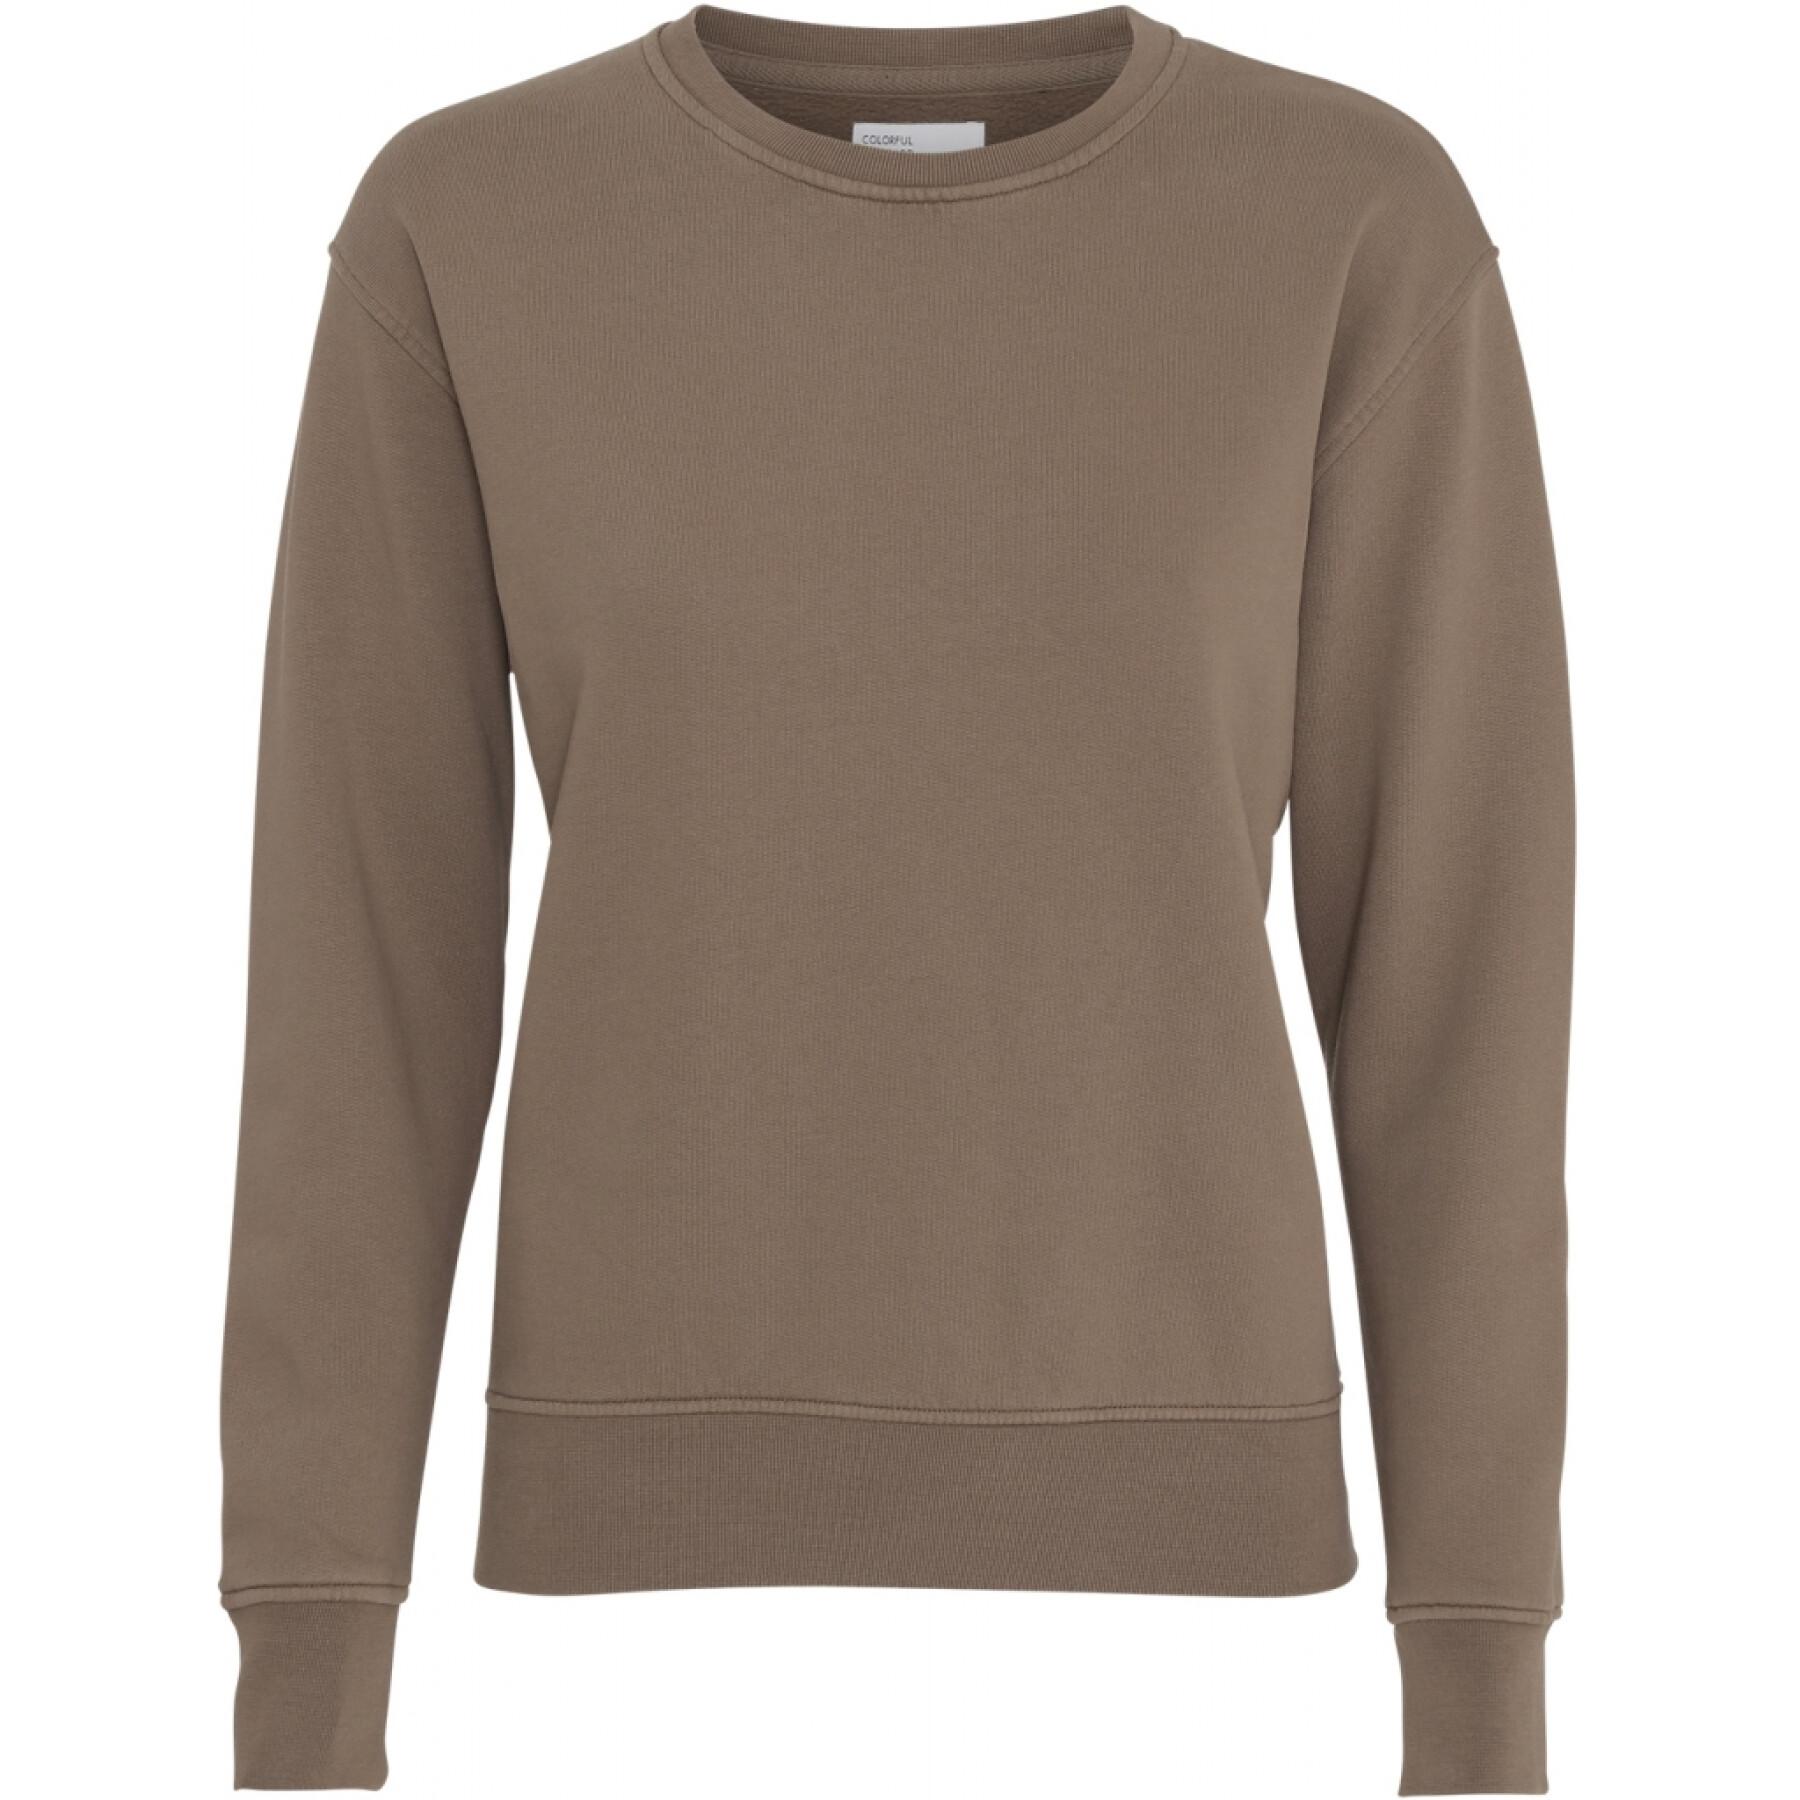 Women's round neck sweater Colorful Standard Classic Organic warm taupe